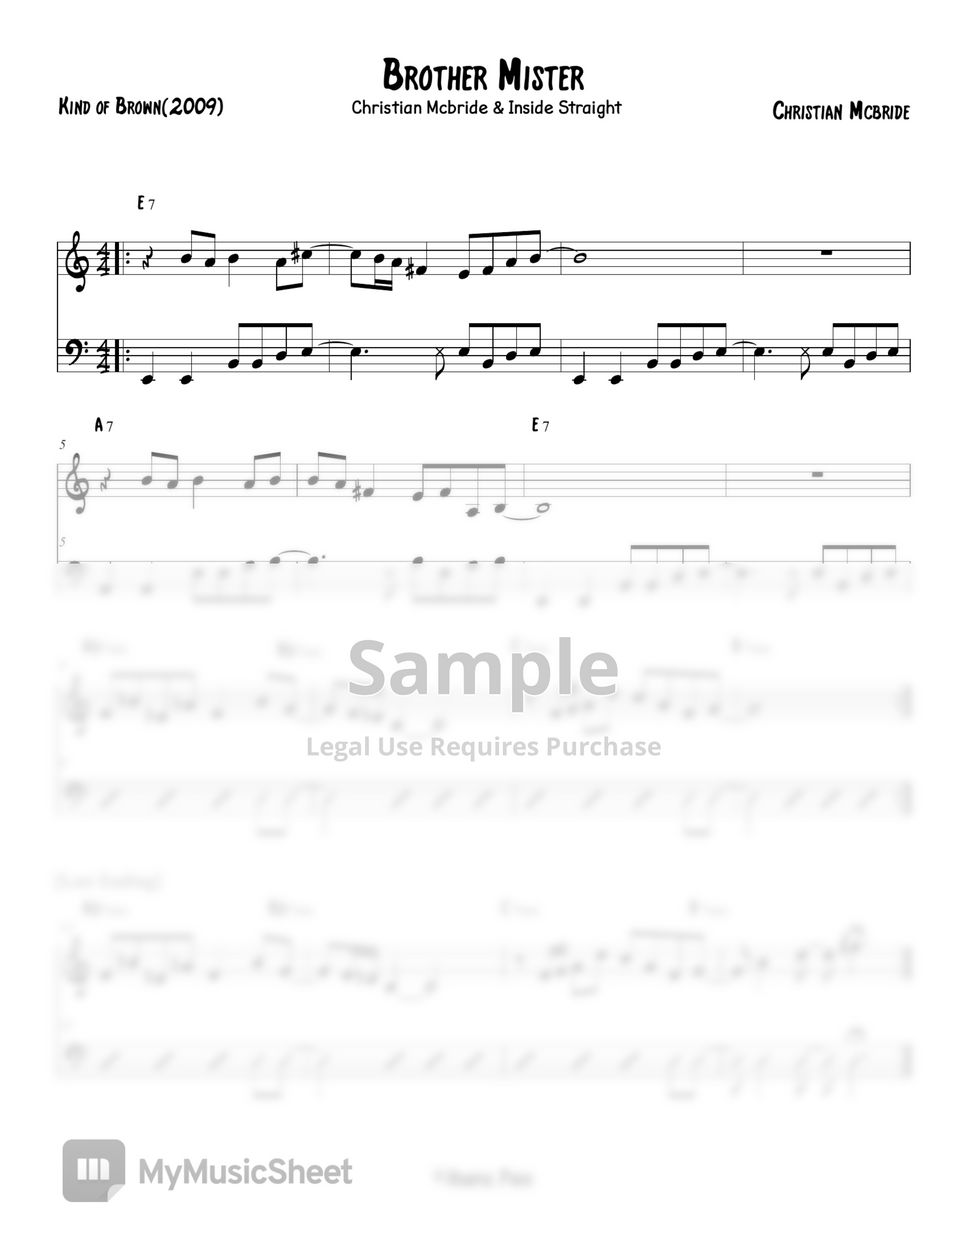 Christian Mcbride & Inside Straight - Brother Mister (Lead Sheet) by Hanyul Park